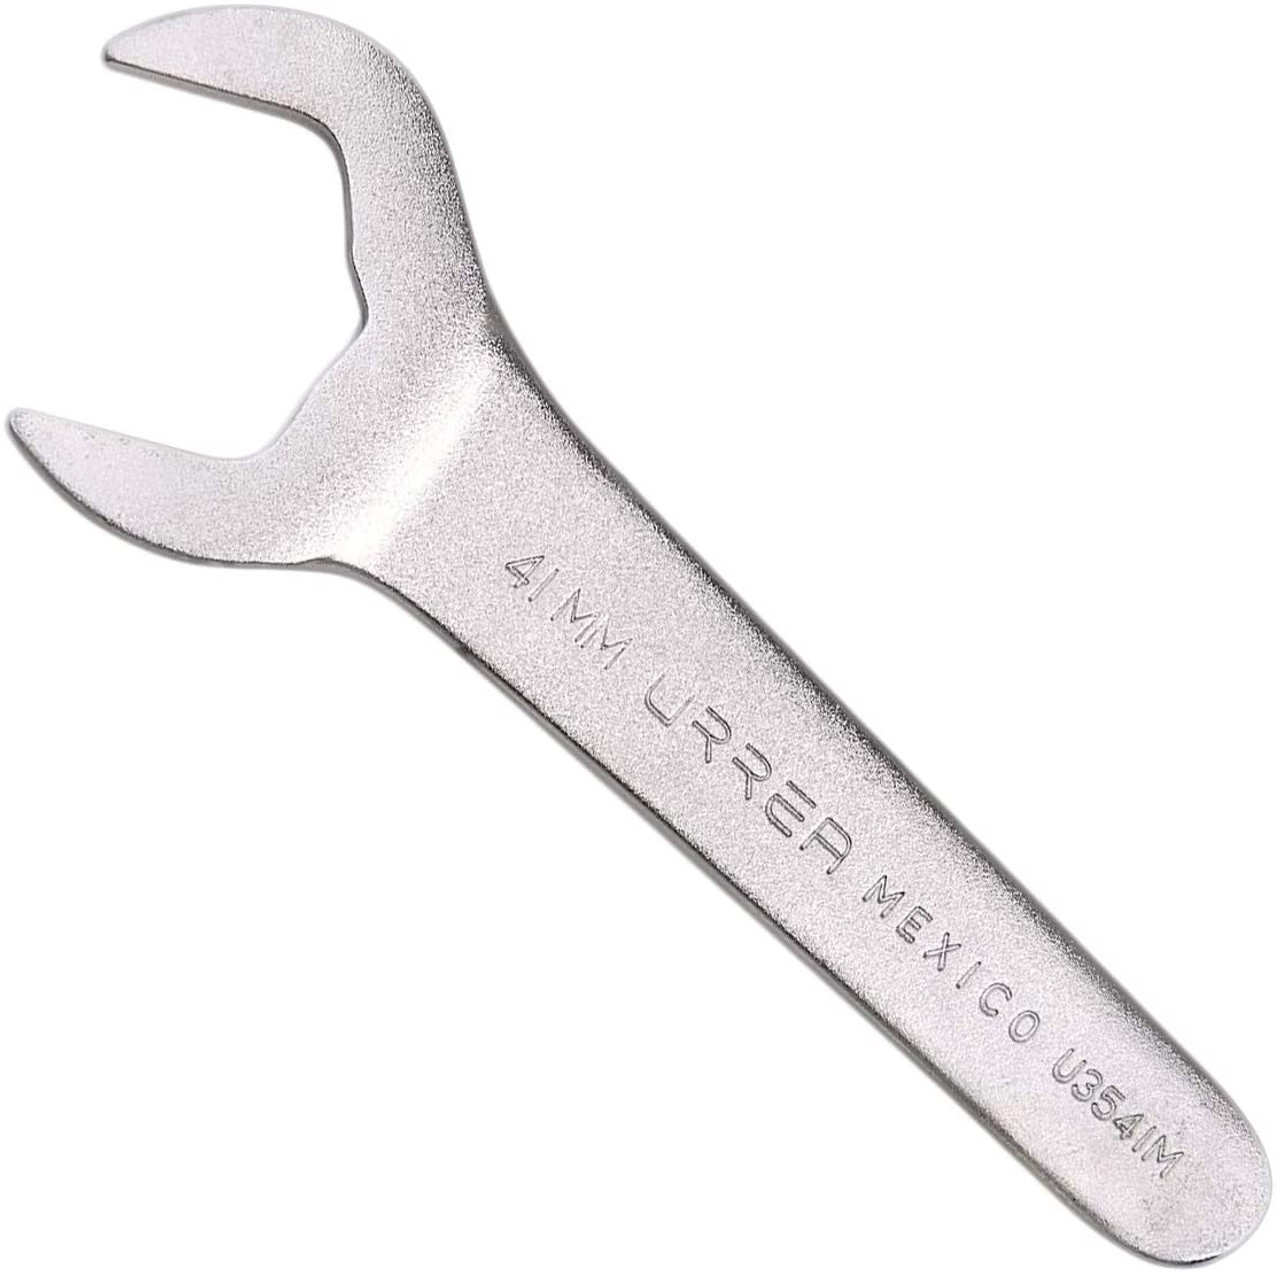 Satin Finish Service wrench, Size: 22 mm, Total Length: 6-5/8"